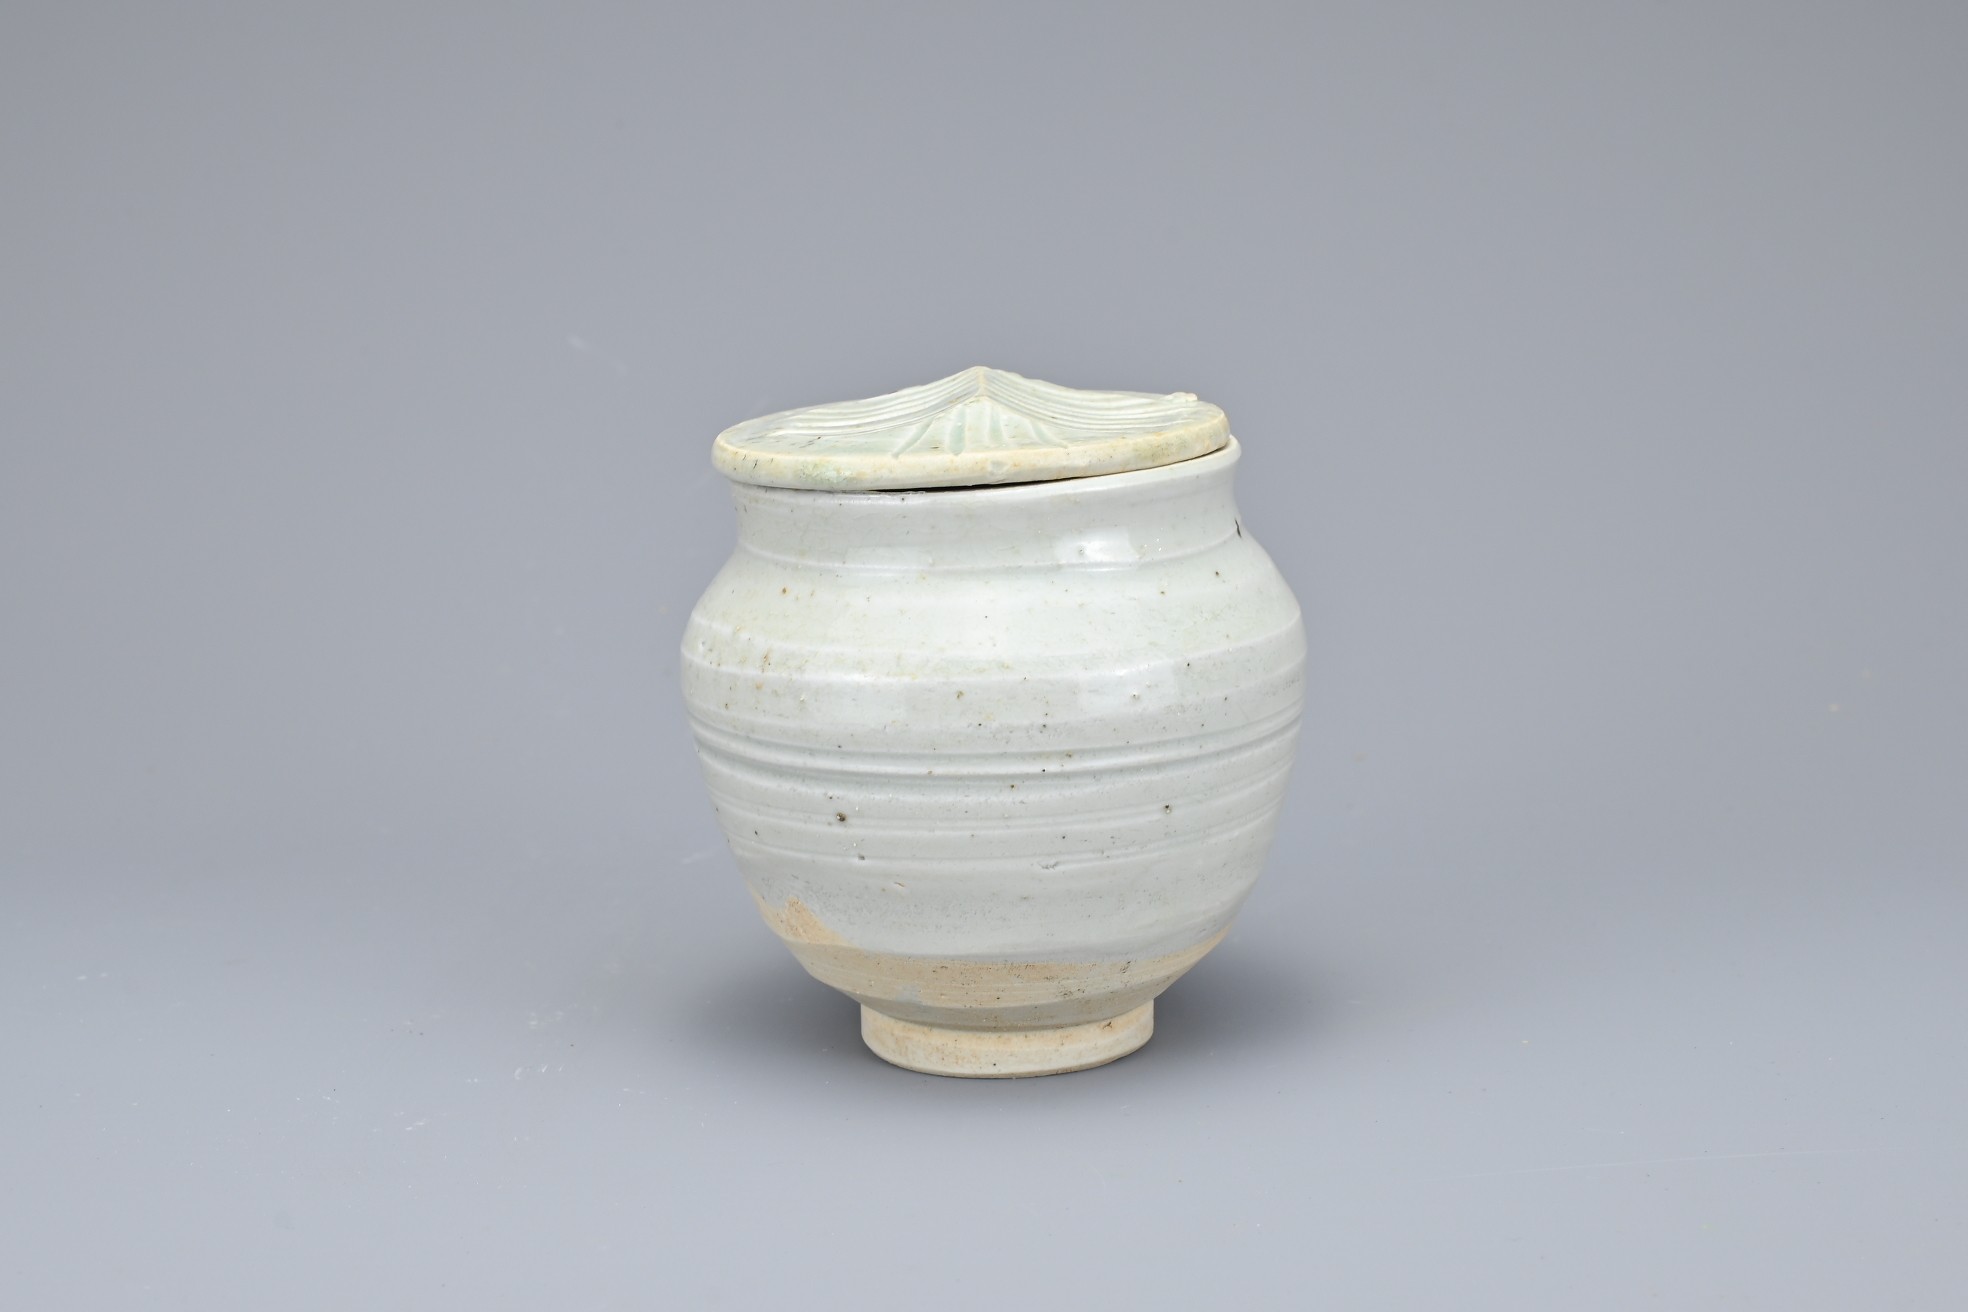 A CHINESE QINGBAI GLAZED COVERED PORCELAIN JAR, SONG / YUAN DYNASTY. Coated inside and out in a